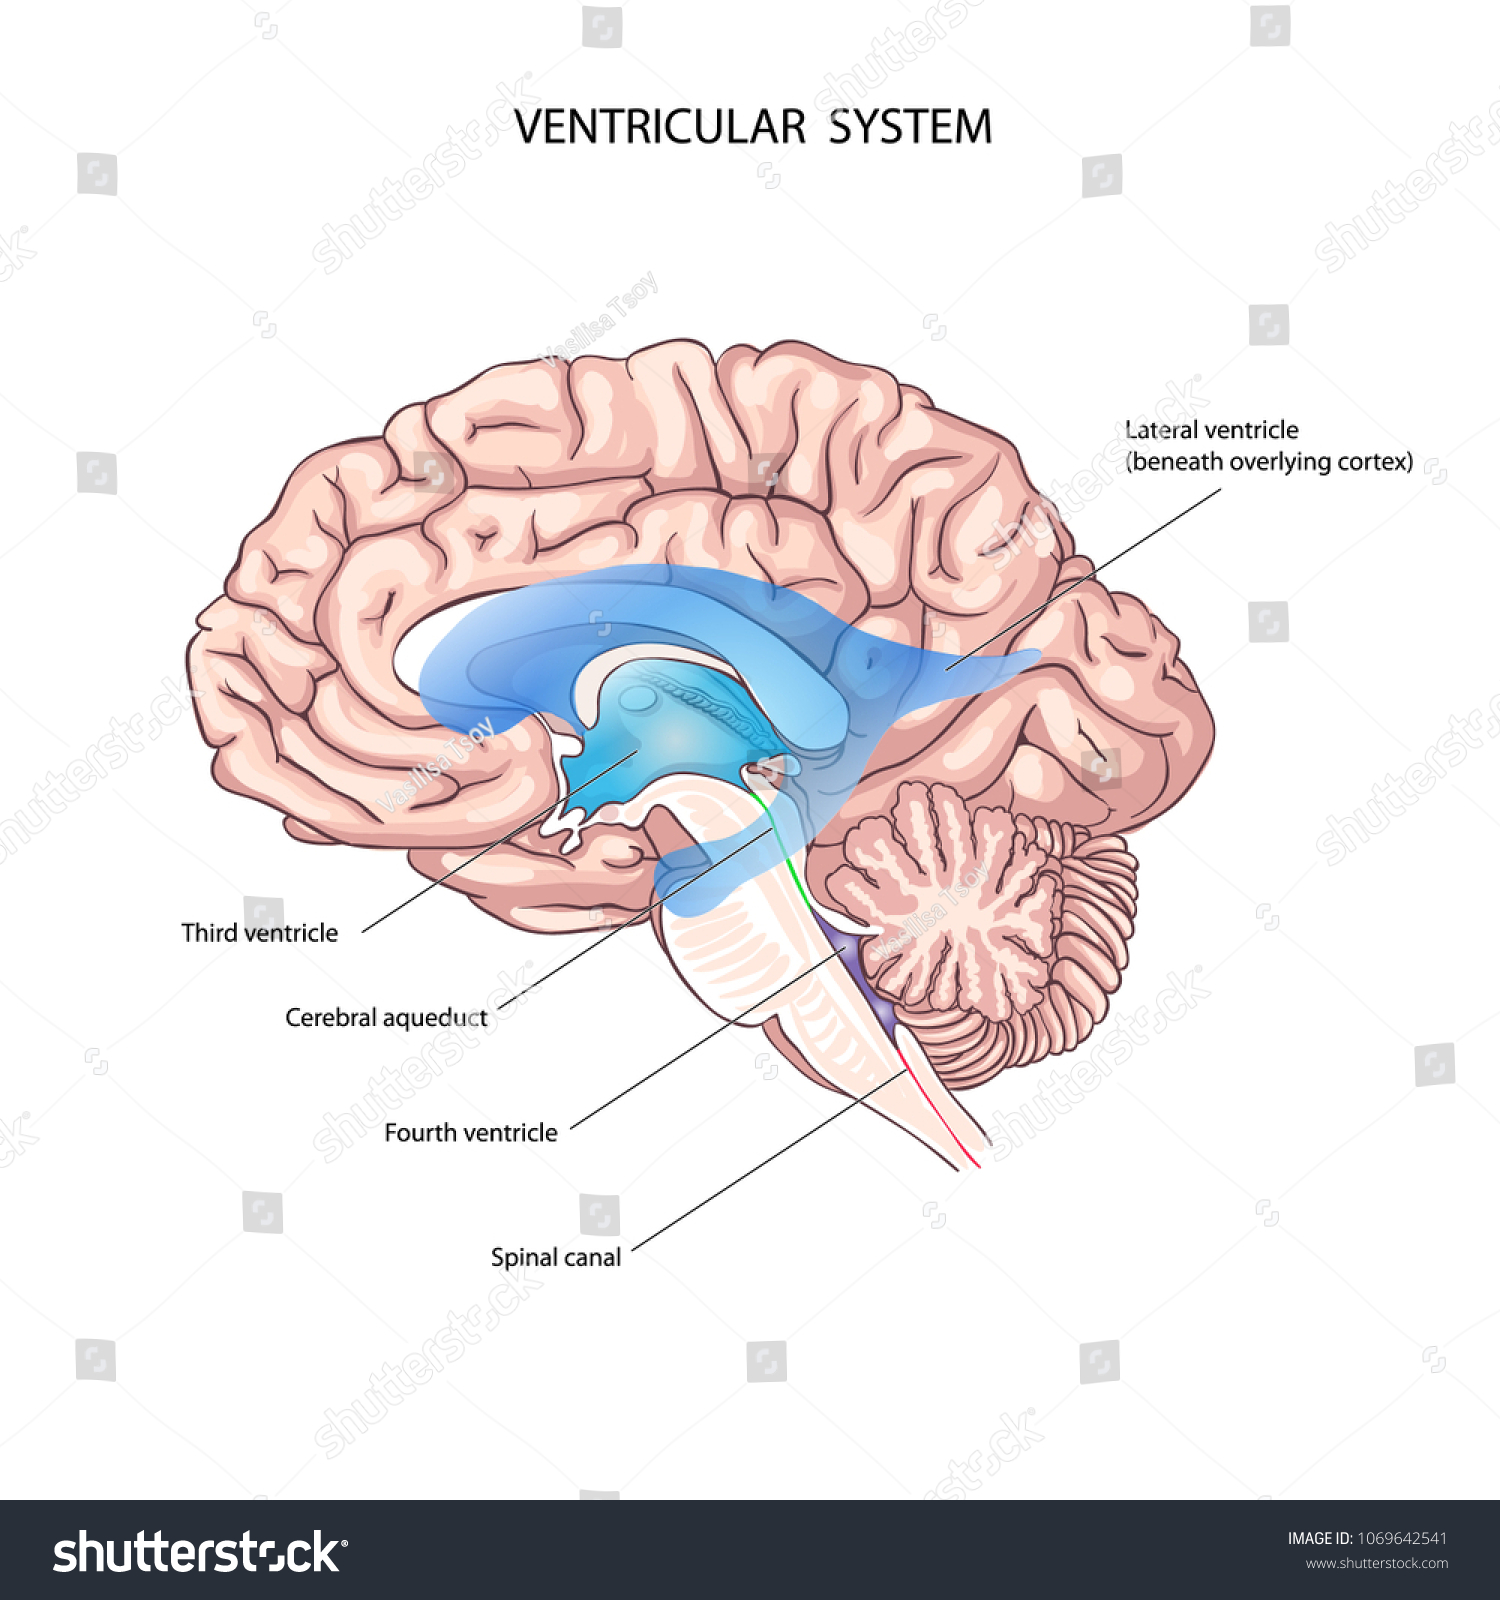 SVG of The human ventricular system. Brain anatomy. the third ventricle, the cerebral aqueduct, the fourth ventricle, and the spinal canal. the power of the brain. brain fluid
 svg